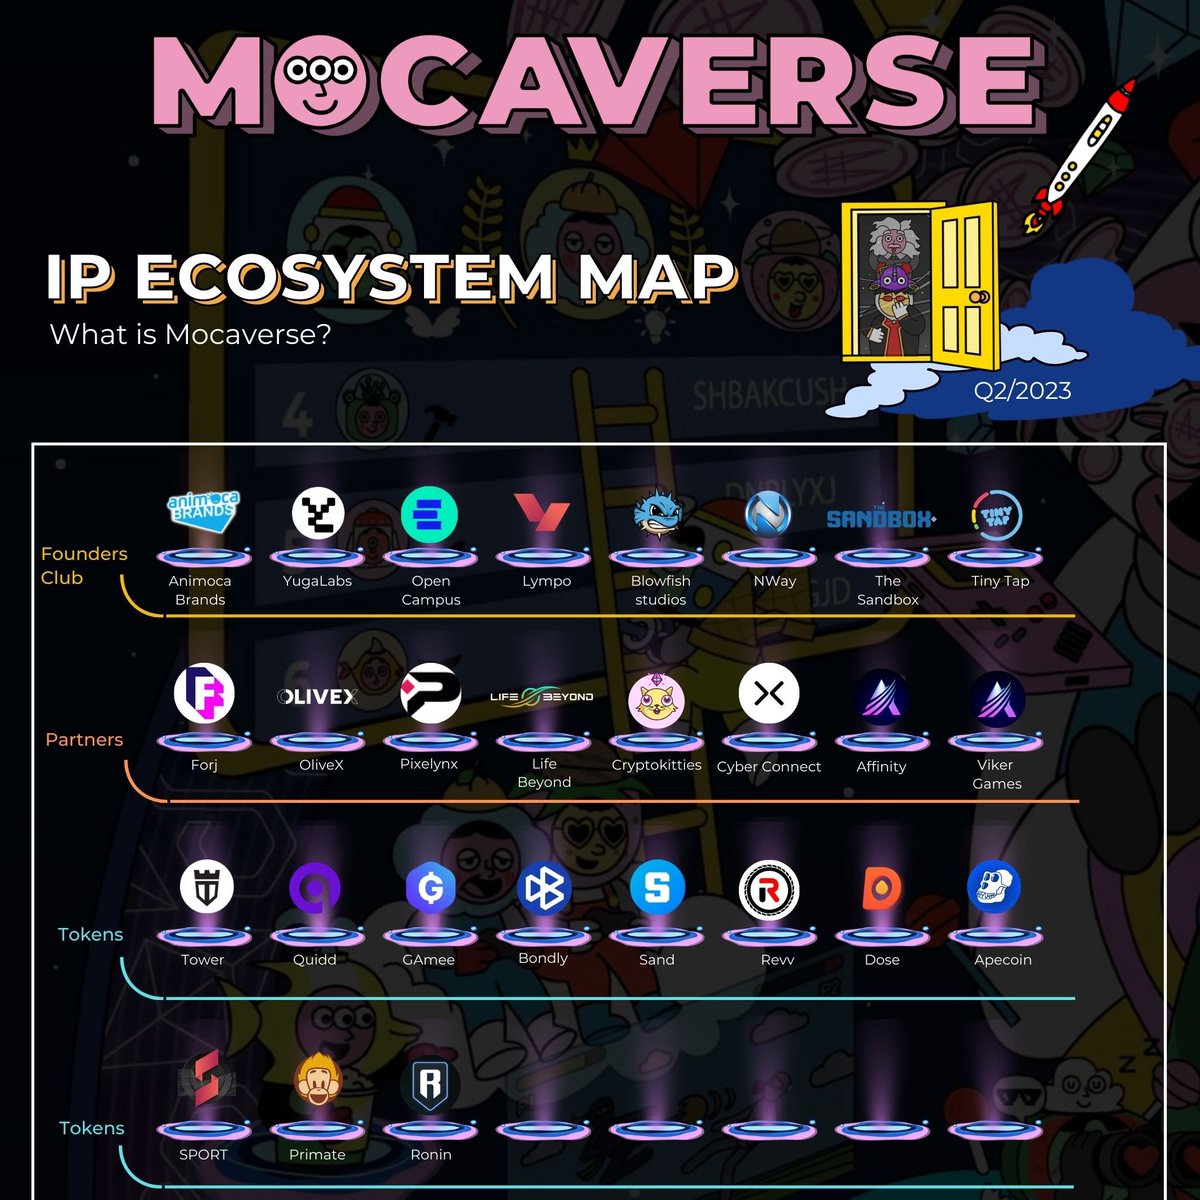 THIS IS MOCAVERSE 

ECO-System MAP

1/...Build by @animocabrands with the CEO @viewfromhk, Chairman  @ysiu and CBO @alanlau999 

2/...Partnered with @yugalabs , @OthersideMeta and CEO @dalegre 

3/...Founder Partner of @opencampus_xyz a @TinyTapAB Subsidiary with CEO…